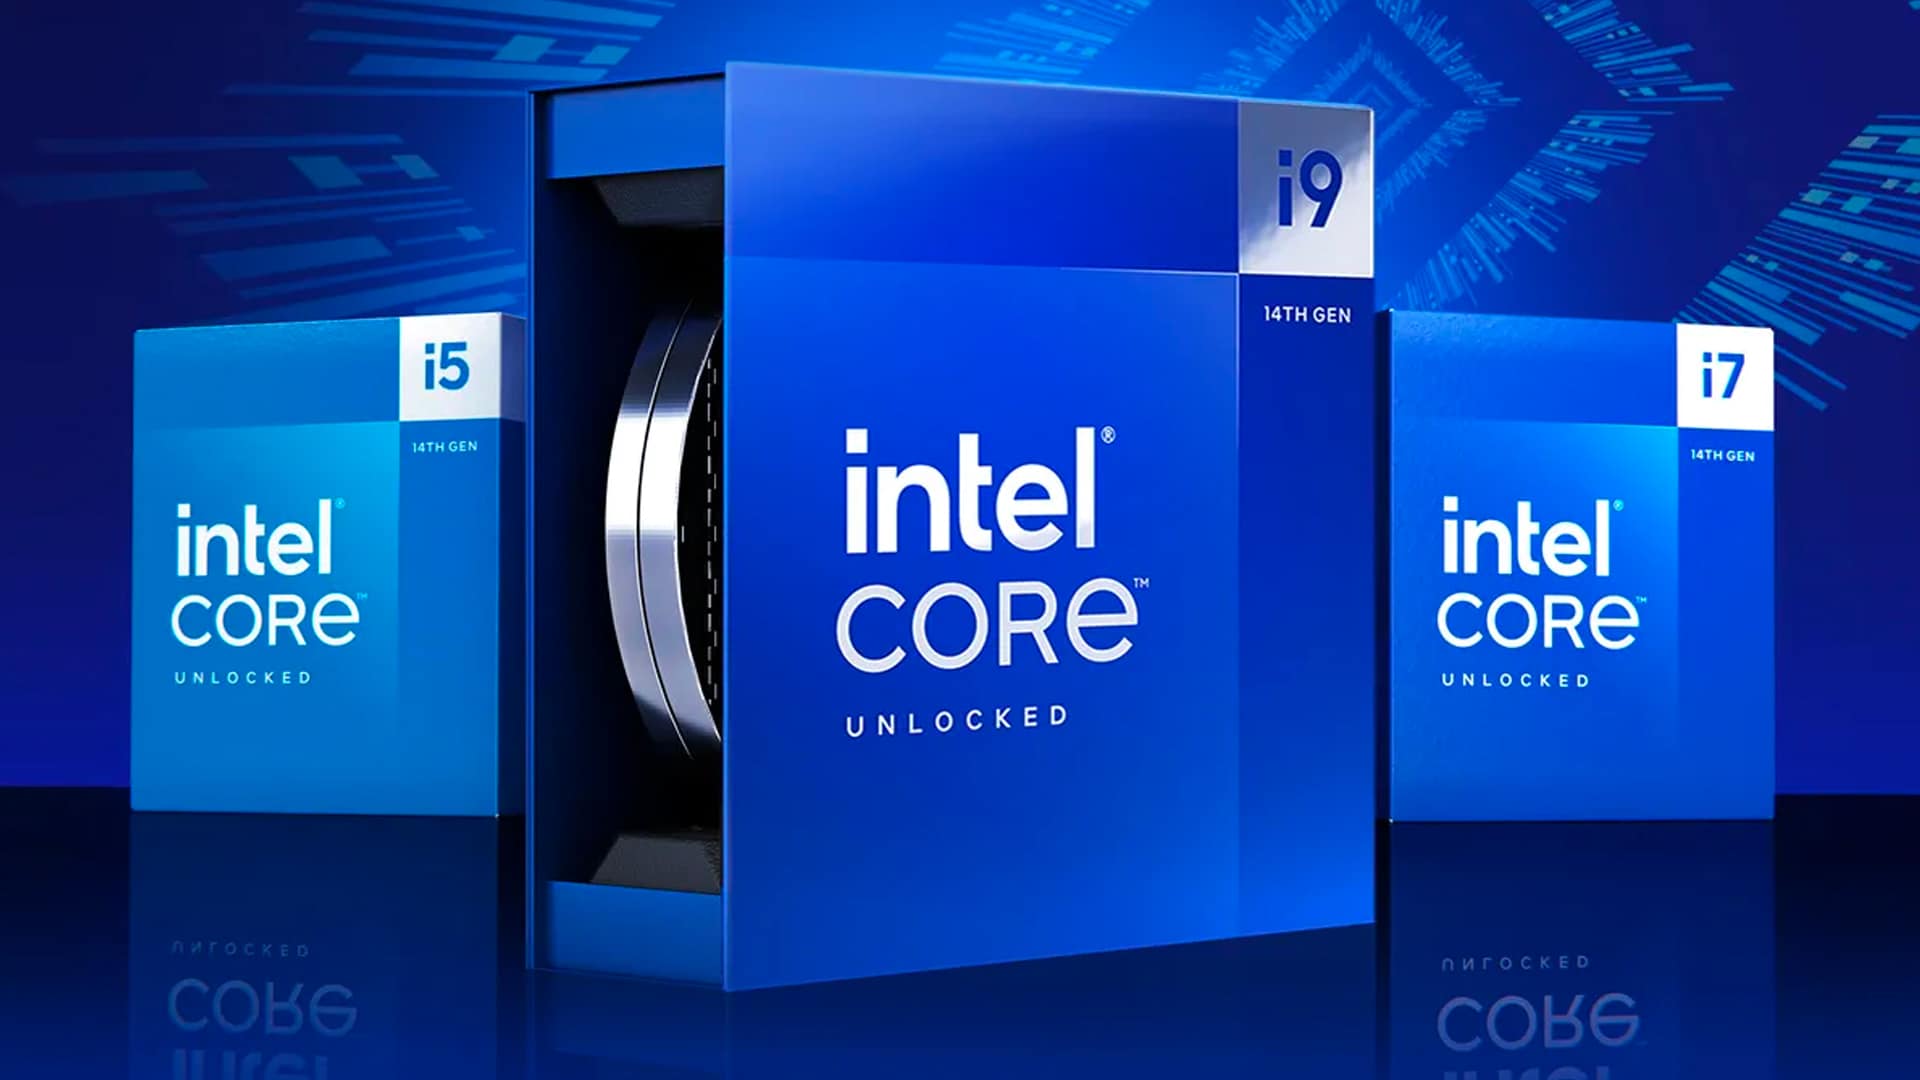 Intel launches 14th-gen Core i9-14900K, Core i7-14700K, Core i5-14600K CPUs  with same prices as predecessors